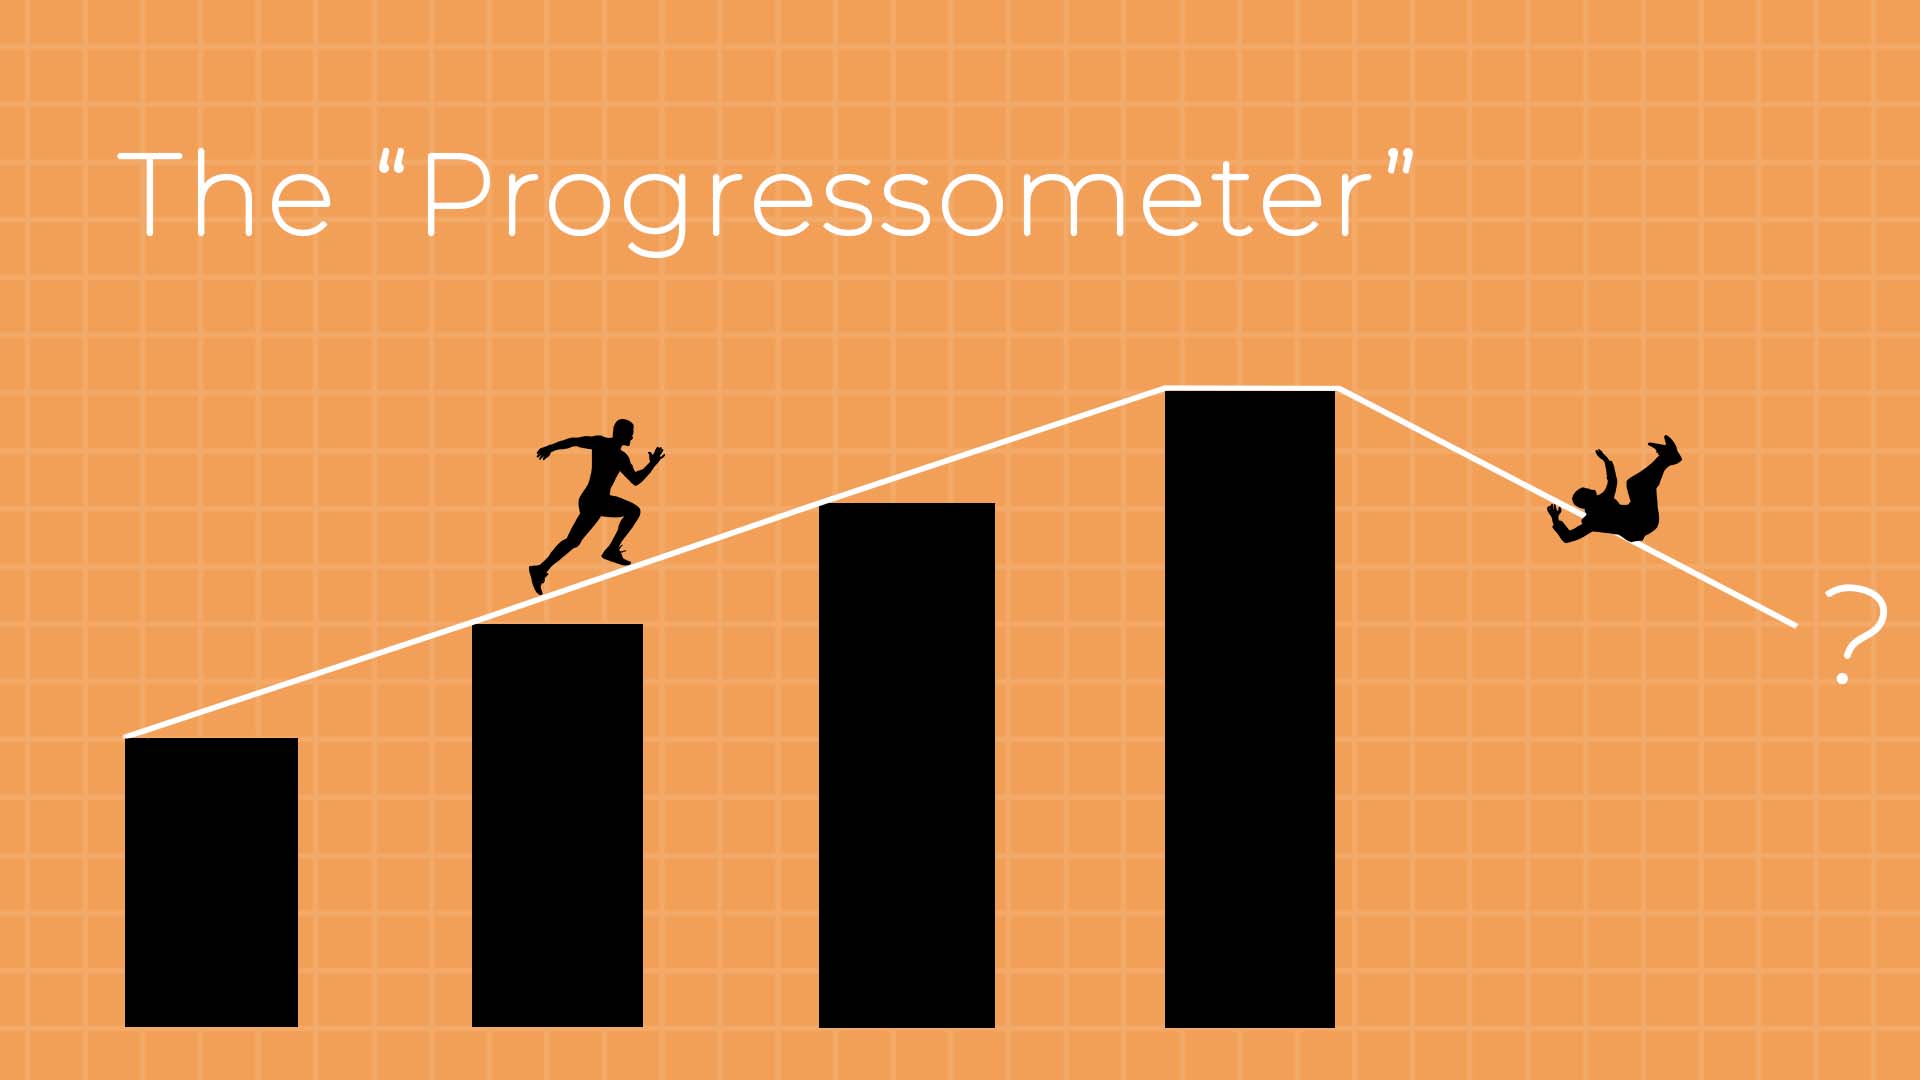 A visualisation of progress, a man running and then sliding down a graph